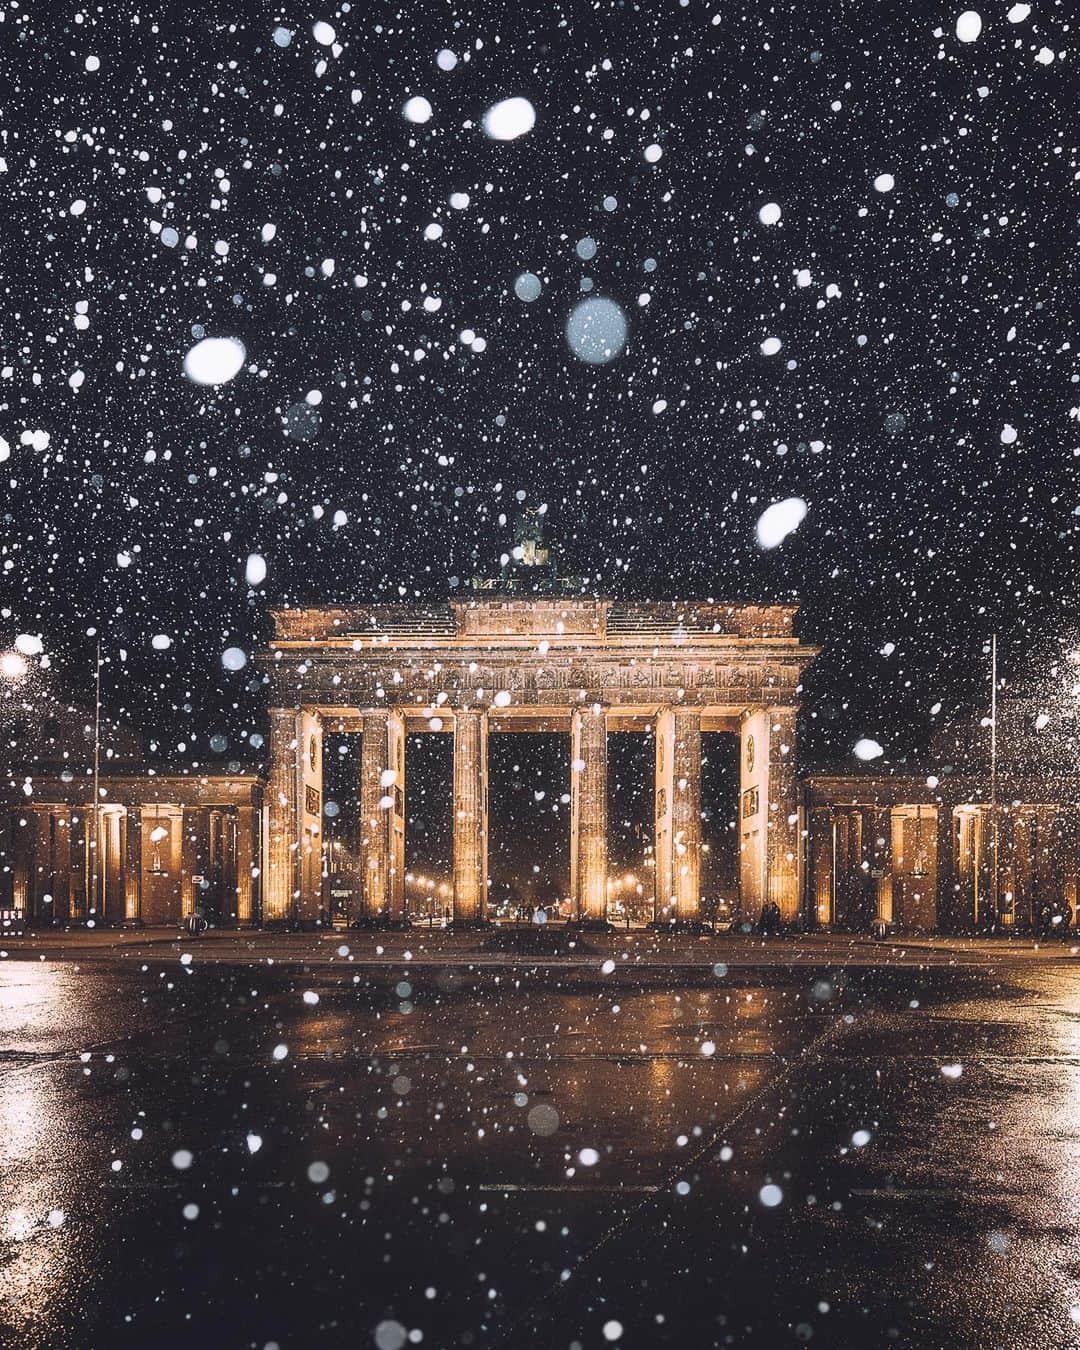 Thomas Kakarekoのインスタグラム：「feels like forever ago  Back to snowy nights in Berlin. I used flash for this series to add some drama and sparkle. Takes a little time to find the right settings but once you figured it out, you’ll be left with overexposed snowflakes on a well-exposed background and overall scene.  #berlin」